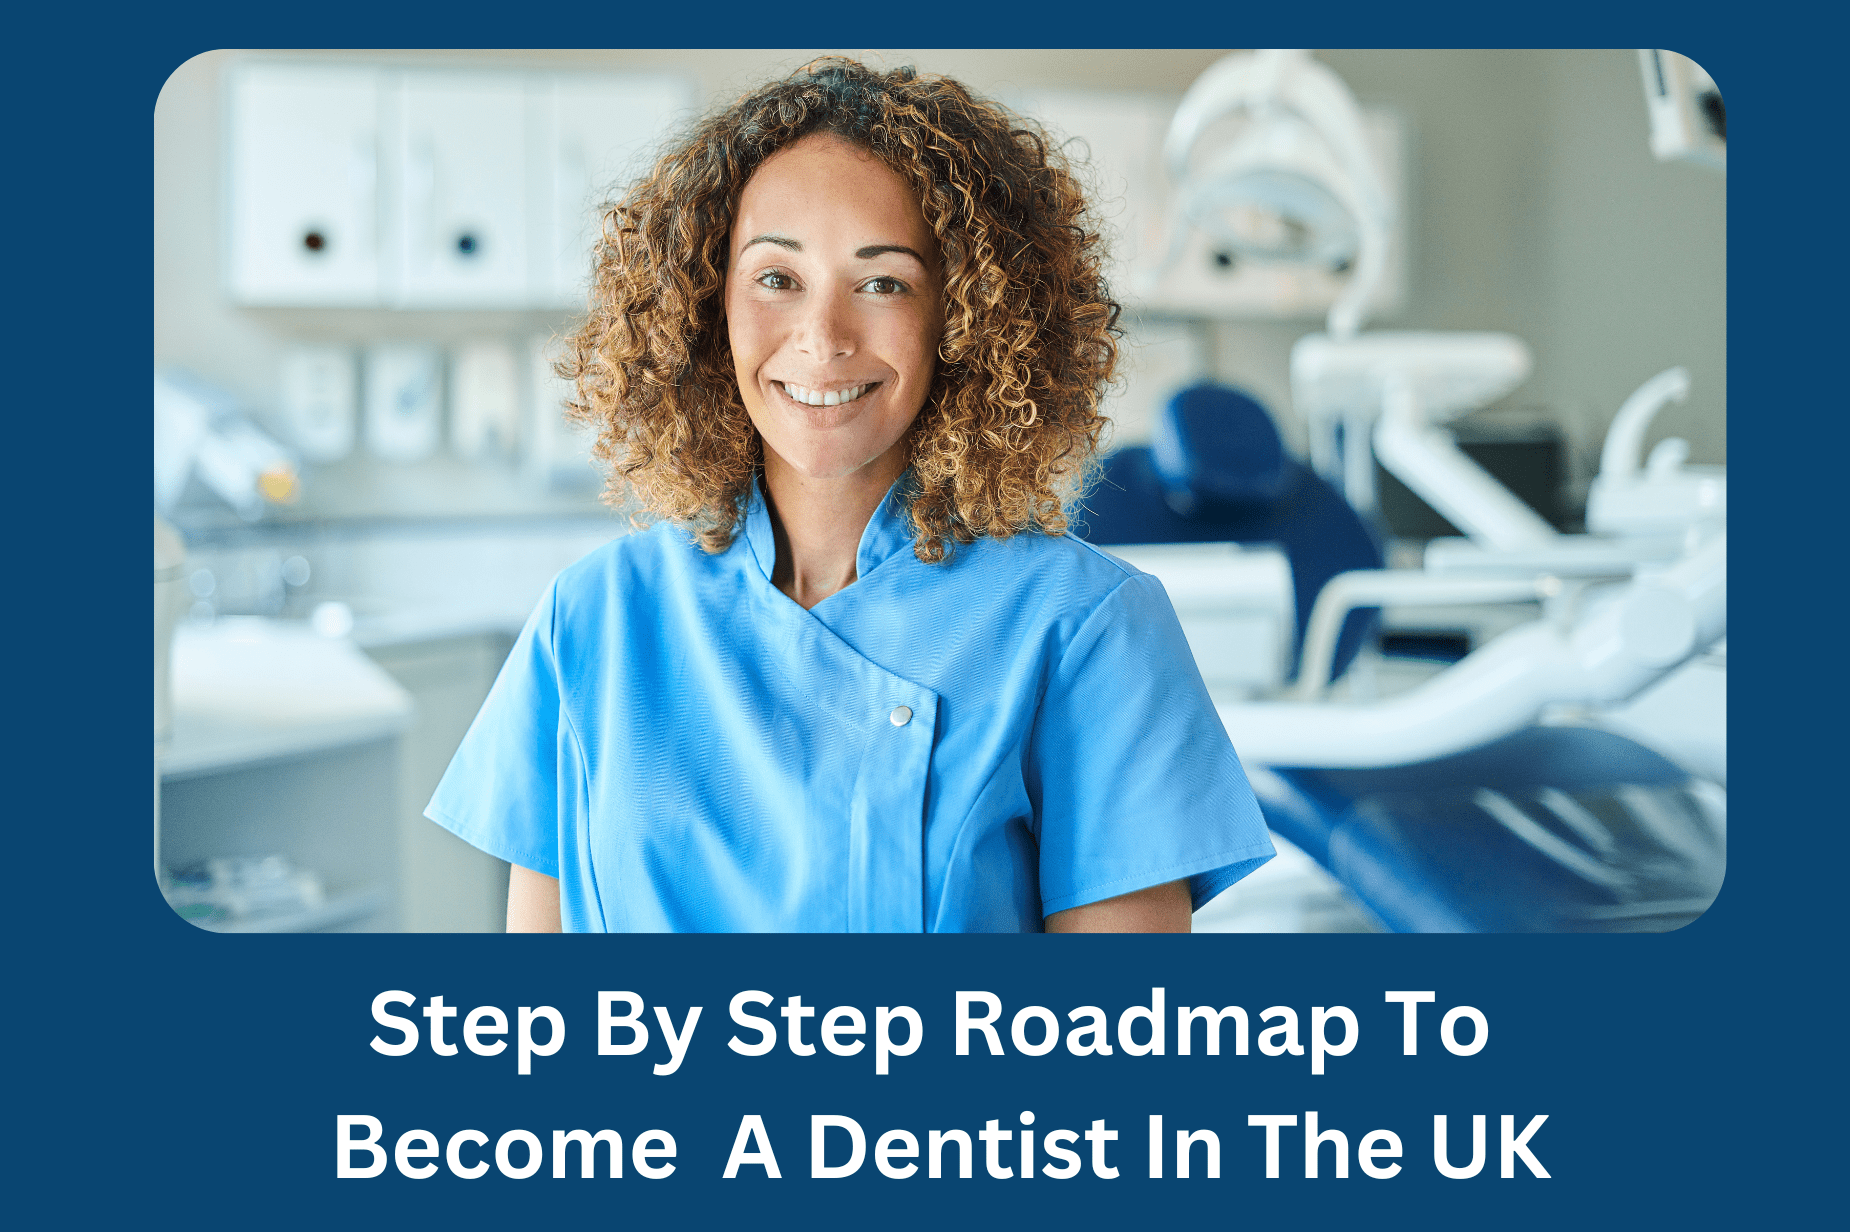 Step By Step Roadmap To Become A Dentist In The UK